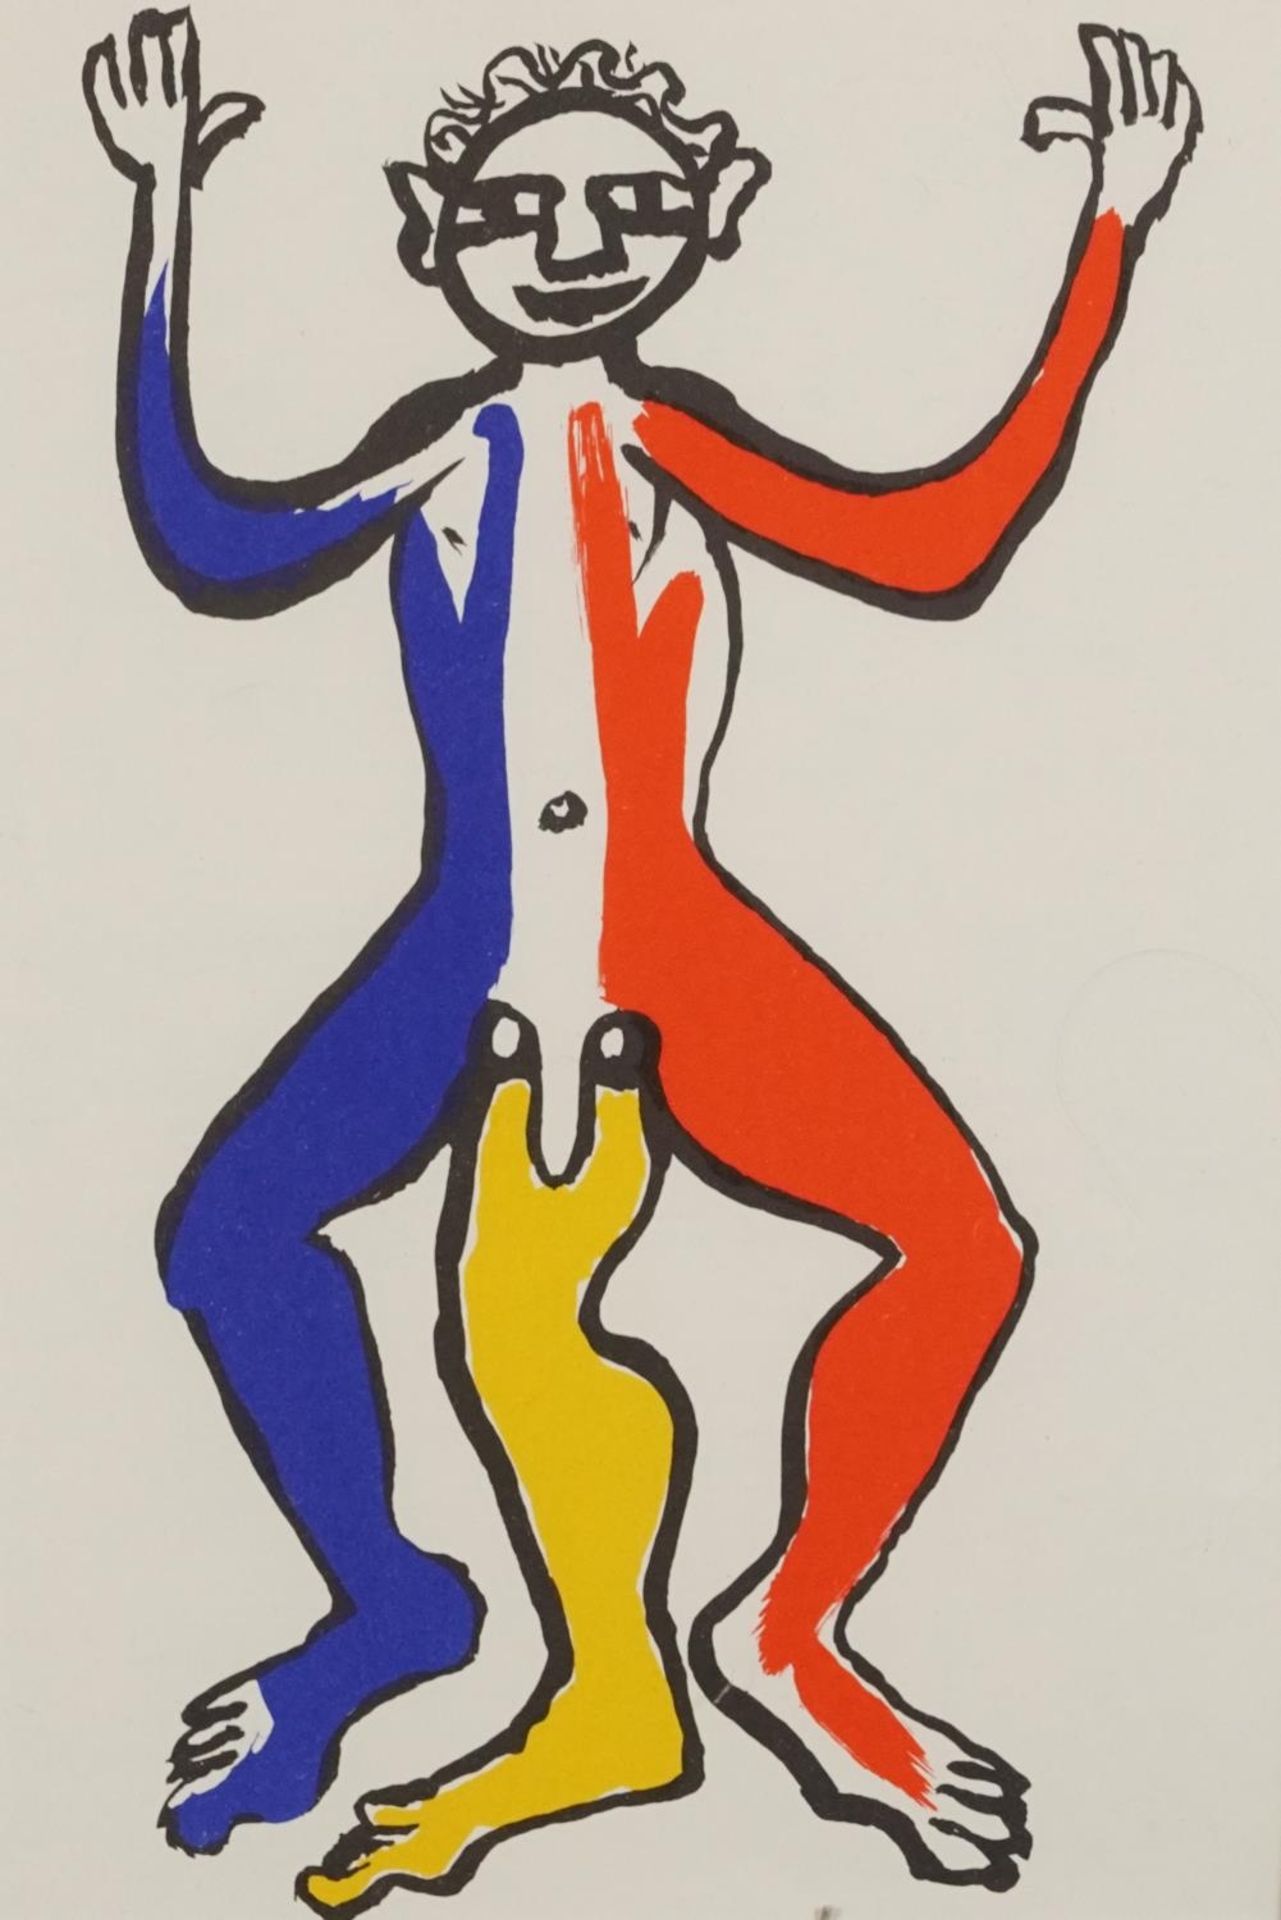 Alexander Calder - Three legged man, lithograph in colour, mounted, framed and glazed, 36.5cm x 26.